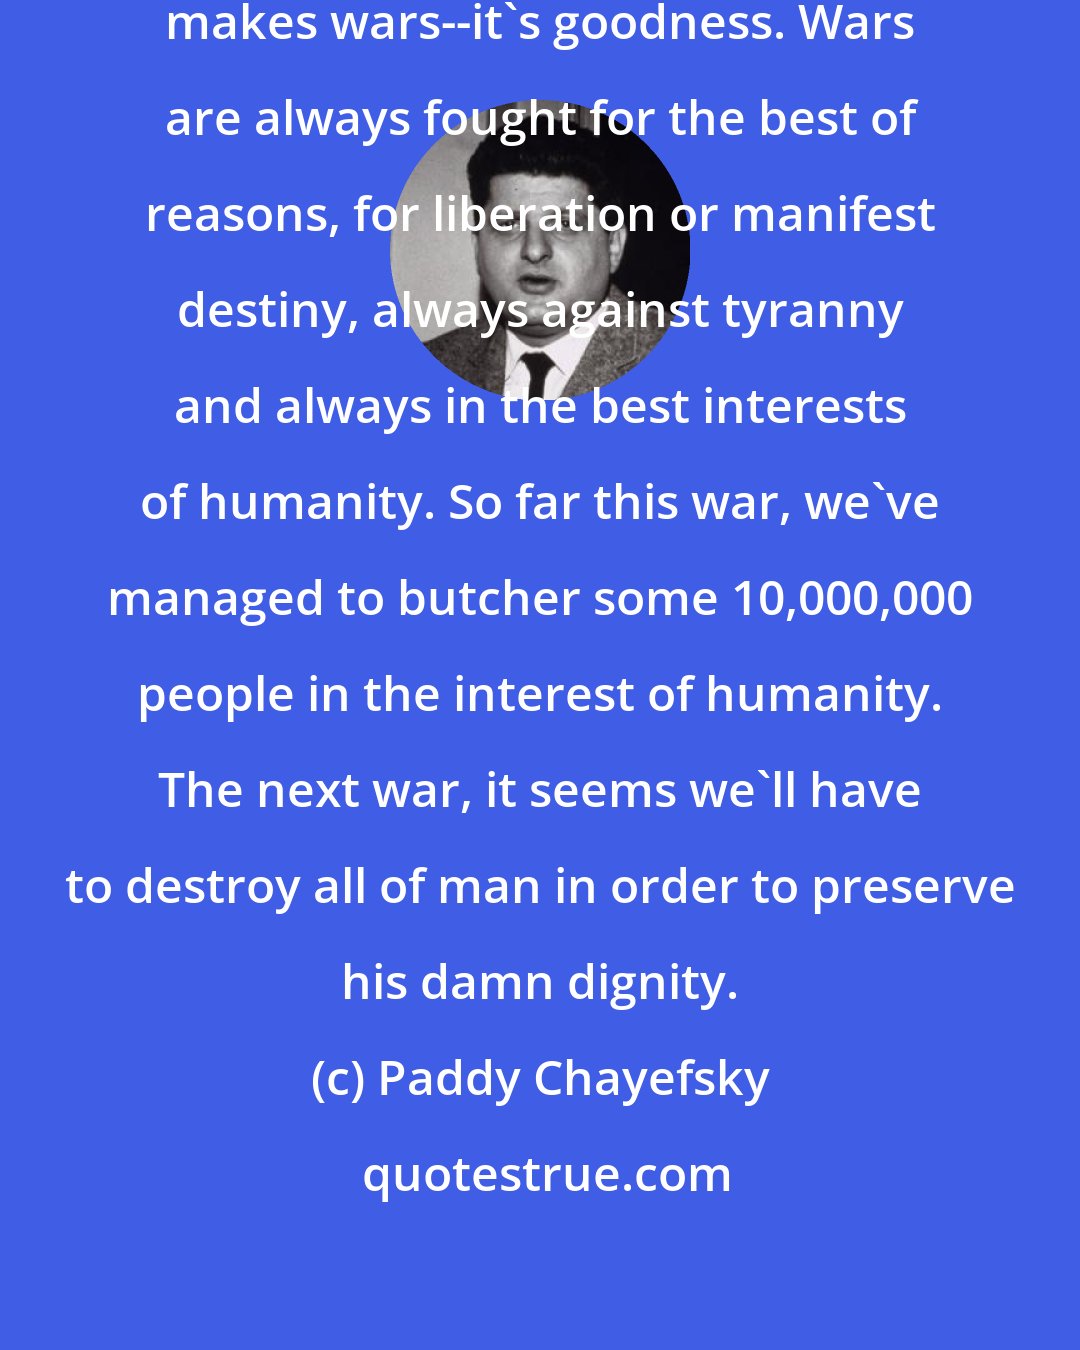 Paddy Chayefsky: It's not greed and ambition that makes wars--it's goodness. Wars are always fought for the best of reasons, for liberation or manifest destiny, always against tyranny and always in the best interests of humanity. So far this war, we've managed to butcher some 10,000,000 people in the interest of humanity. The next war, it seems we'll have to destroy all of man in order to preserve his damn dignity.